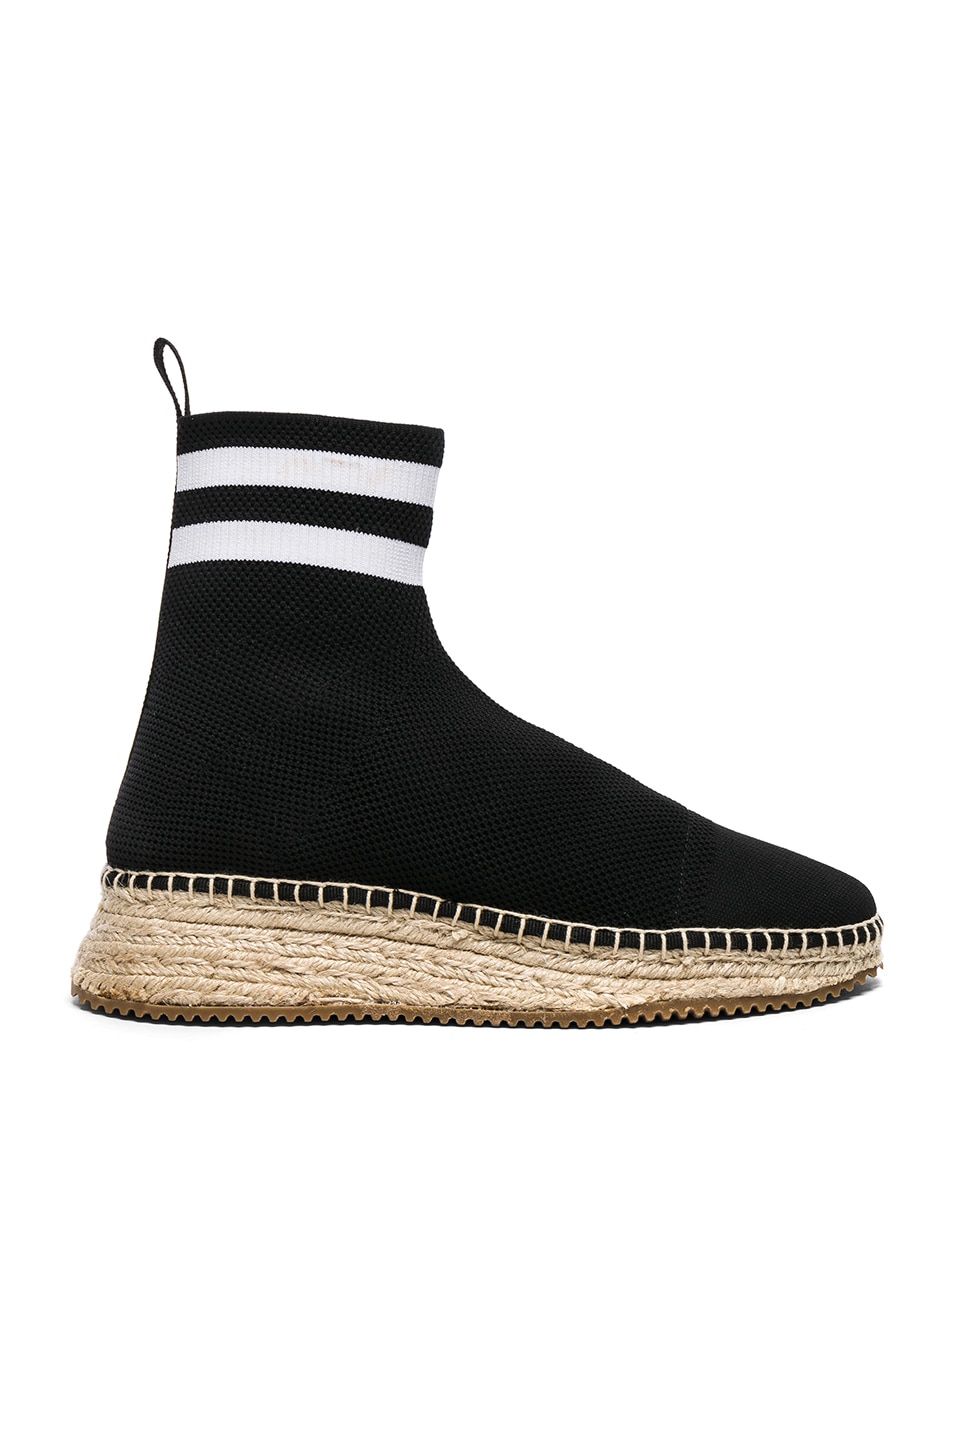 Image 1 of Alexander Wang Dylan Sock Boots in Black & White